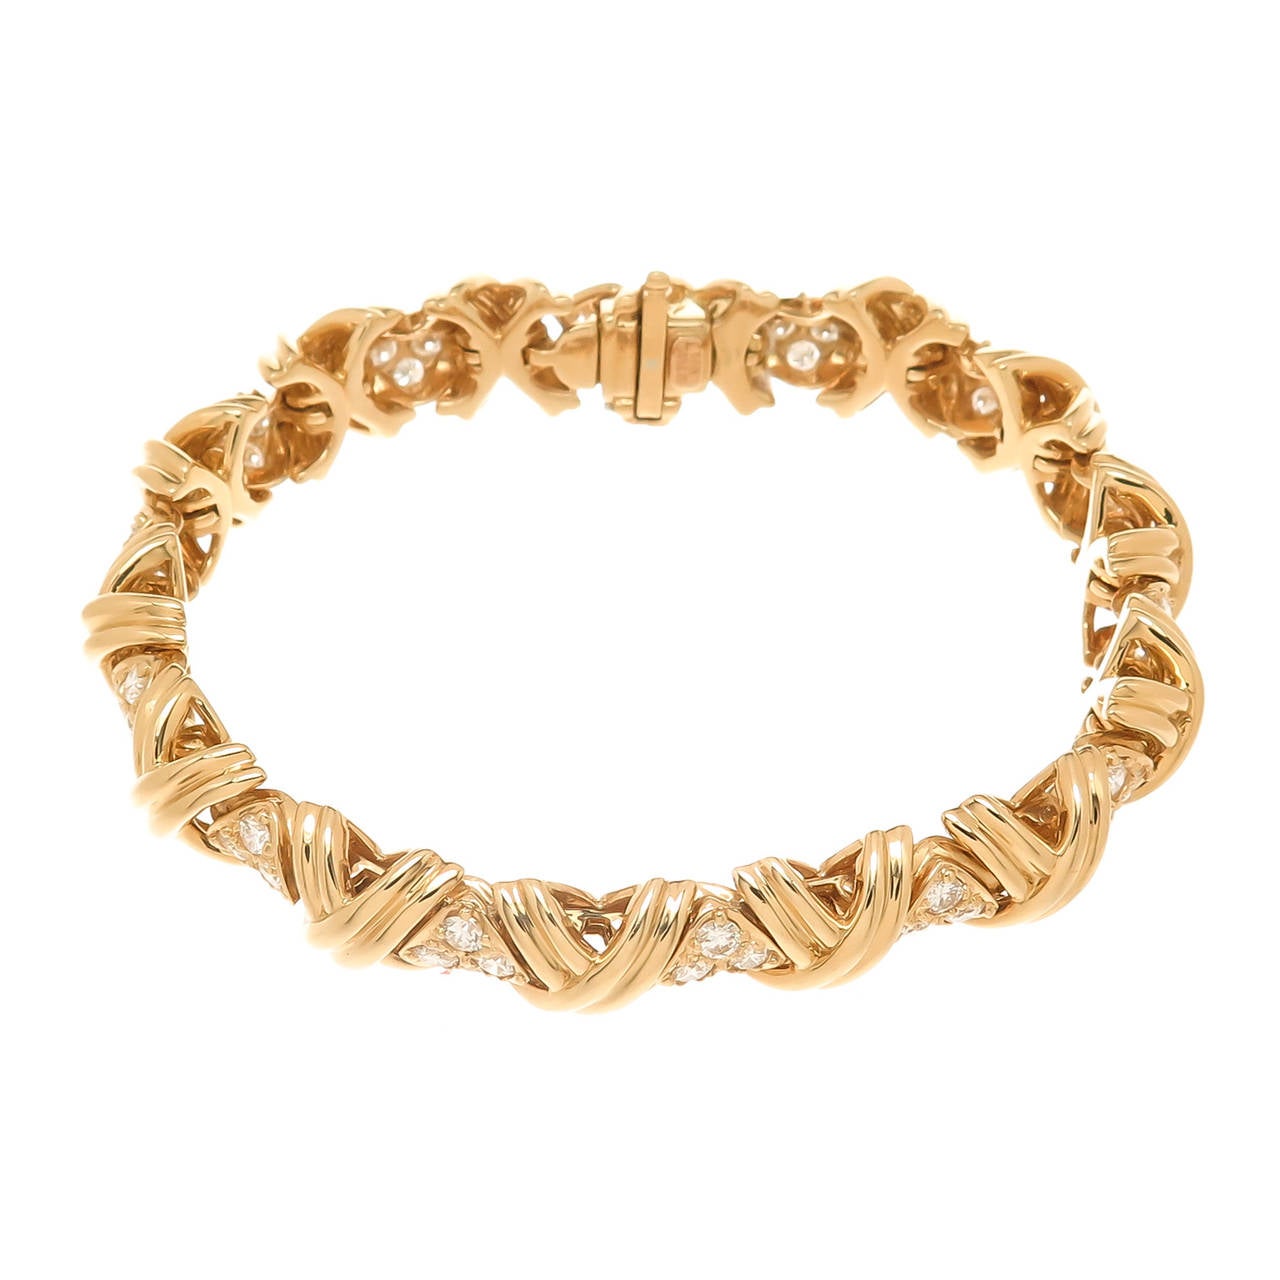 Circa 1990s Tiffany & Company Signature Collection X bracelet, 18K Yellow Gold, Round brilliant cut Diamonds totaling approximately 2 carats and are F-G in Color and VS in clarity. Measuring 7 3/8 inch in length and 3/8 inch wide.